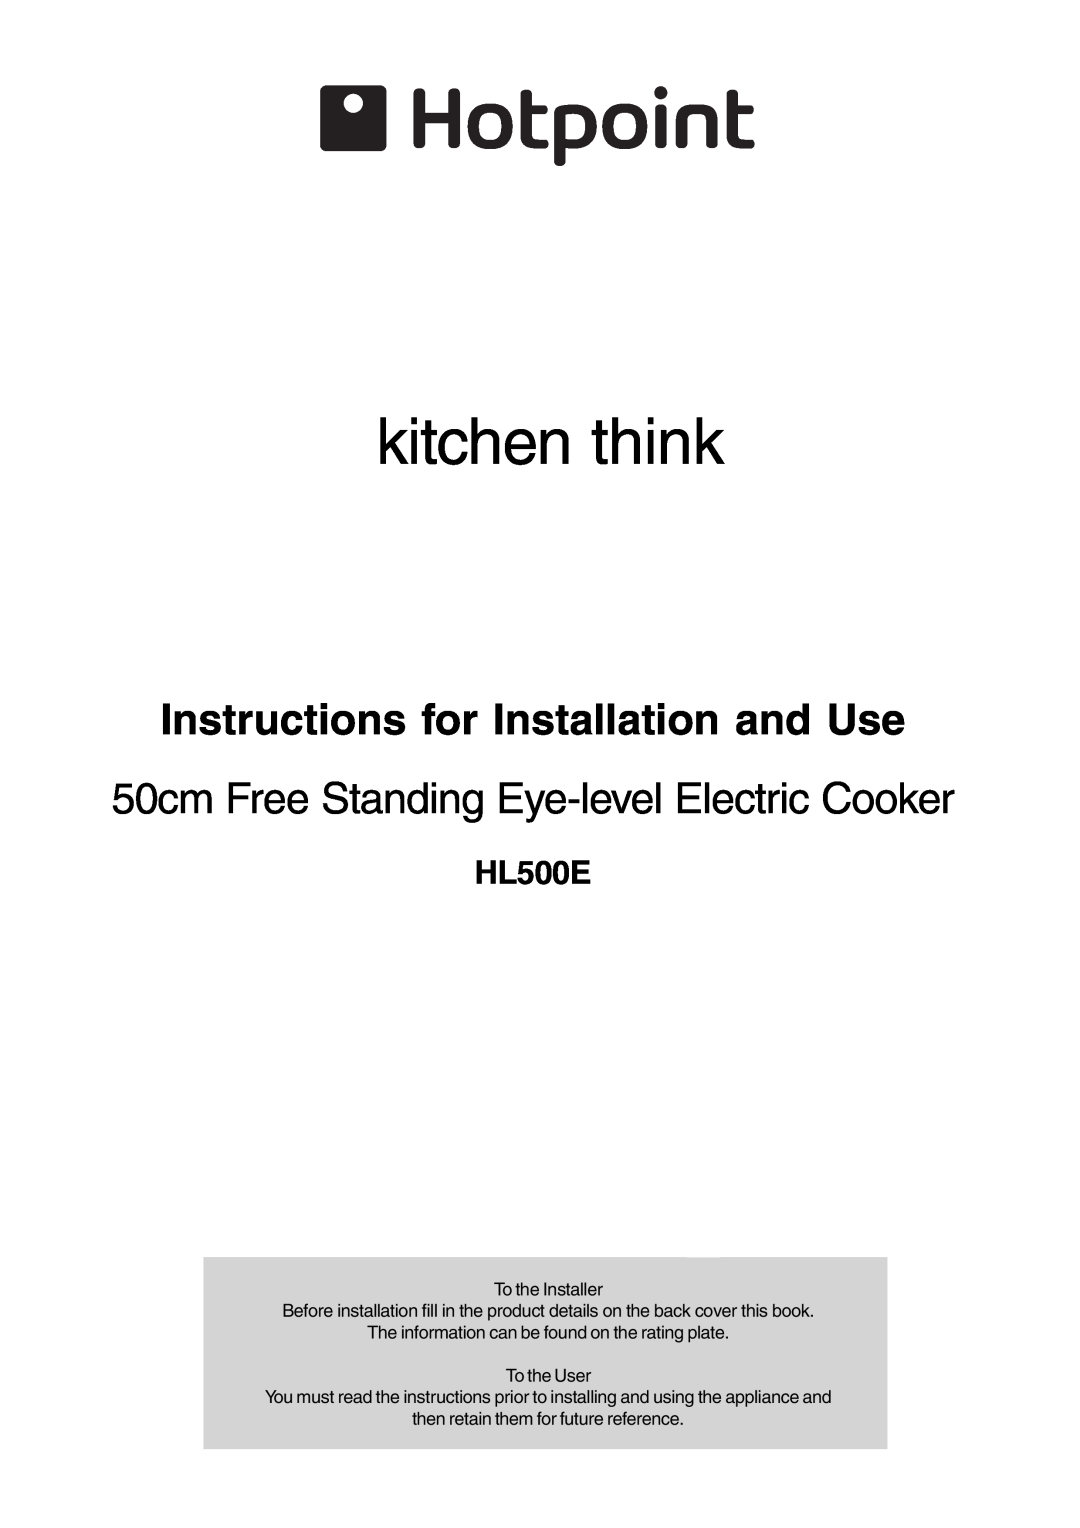 Hotpoint HL500E manual kitchen think, Instructions for Installation and Use, 50cm Free Standing Eye-levelElectric Cooker 